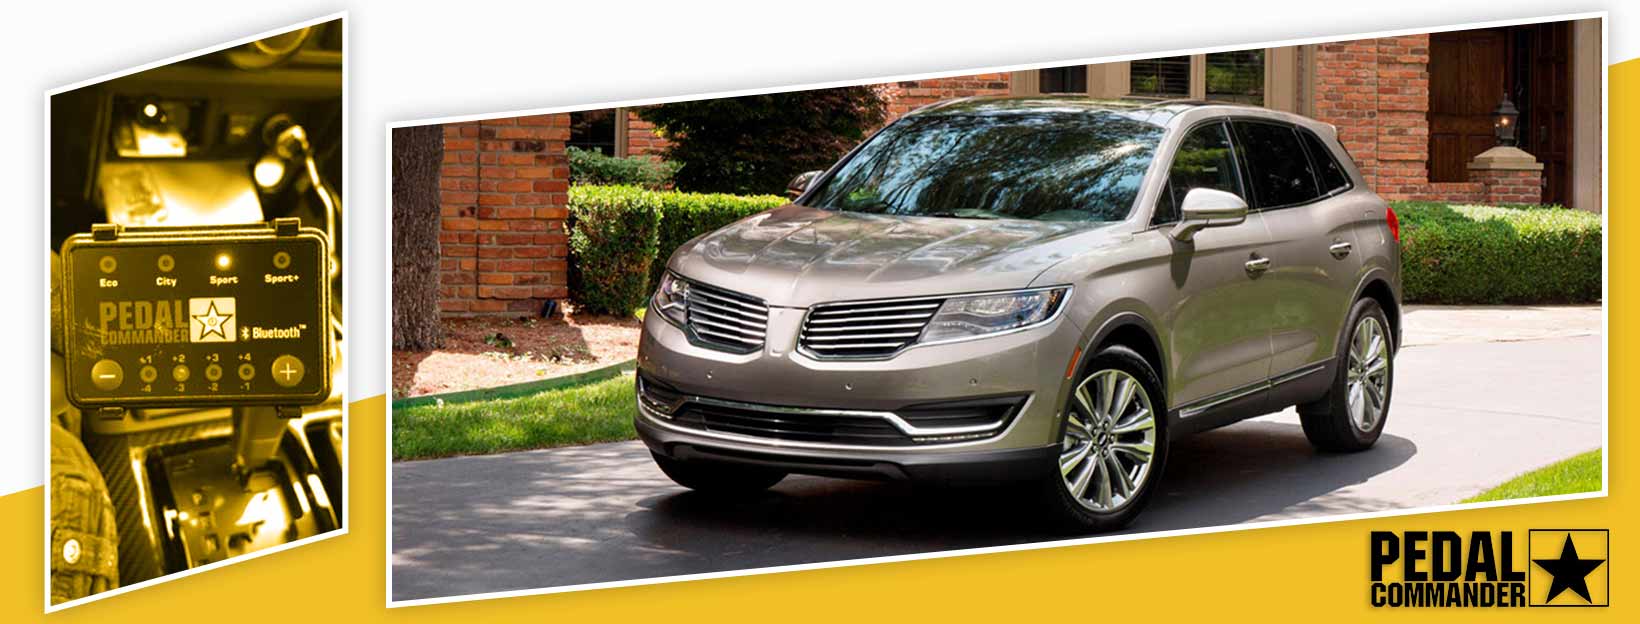 Pedal Commander for Lincoln MKX - front